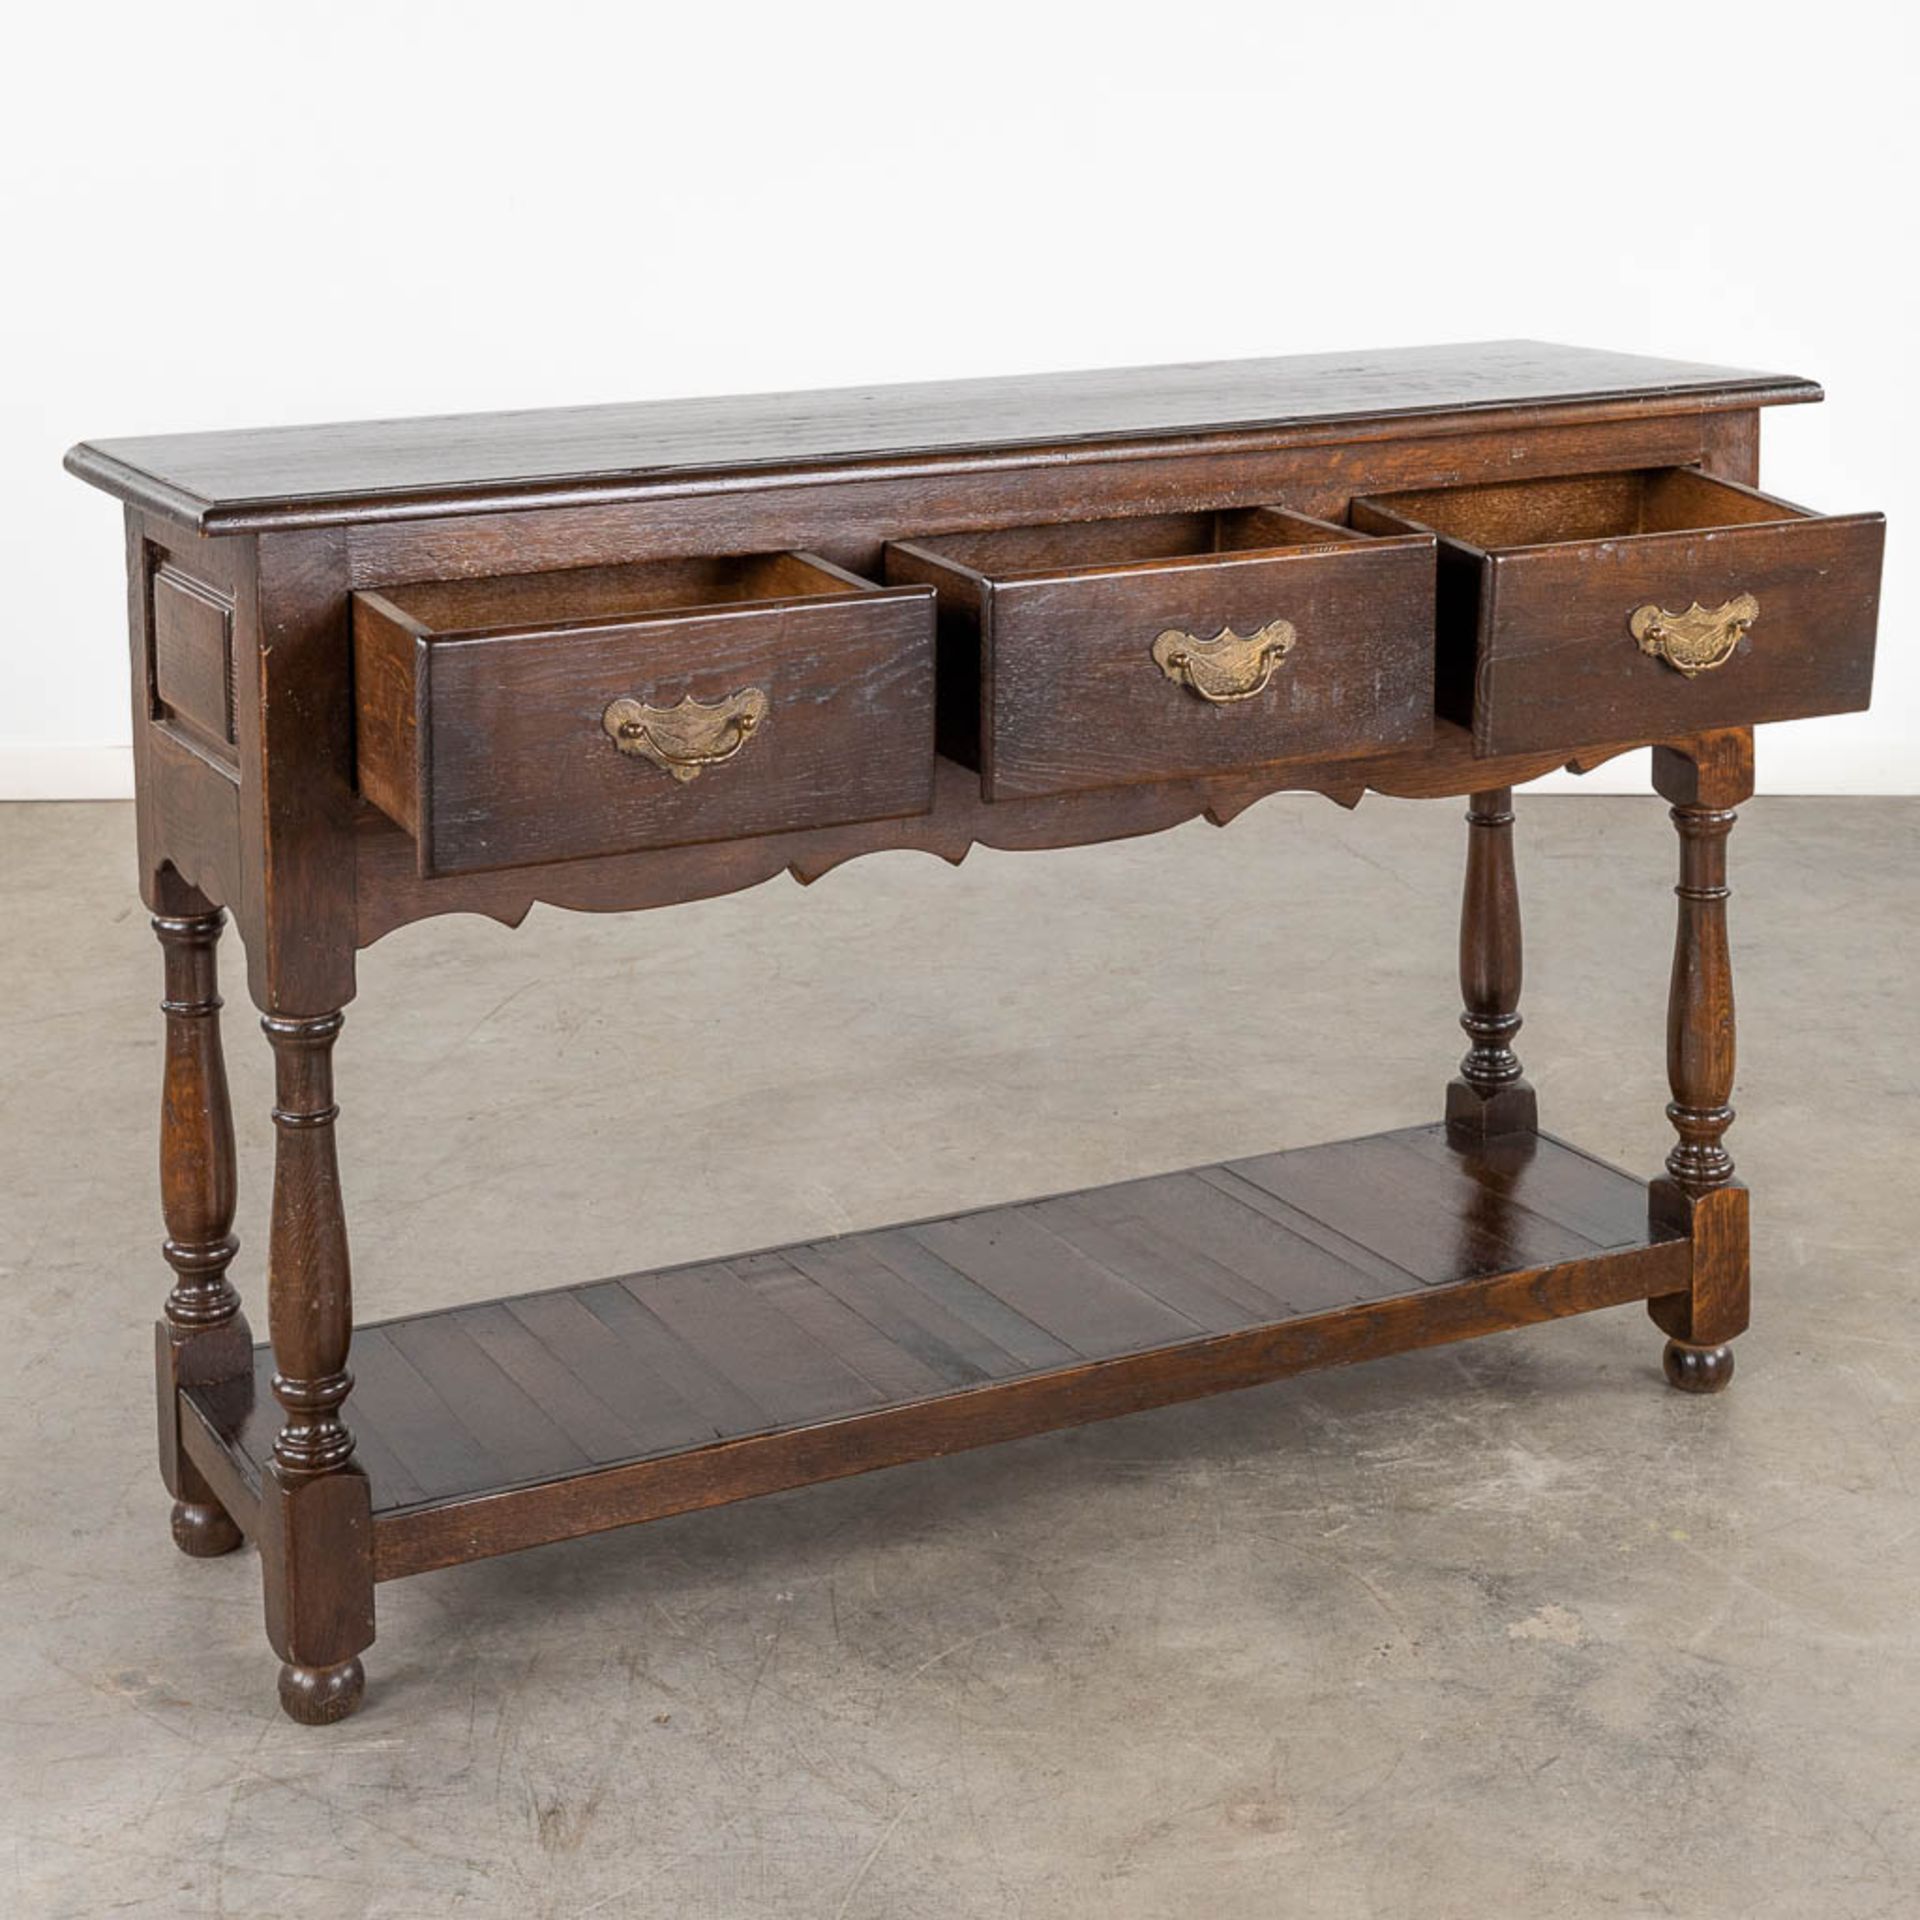 An English console table with 3 drawers. 20th C. (D:35 x W:120 x H:77 cm) - Image 3 of 8